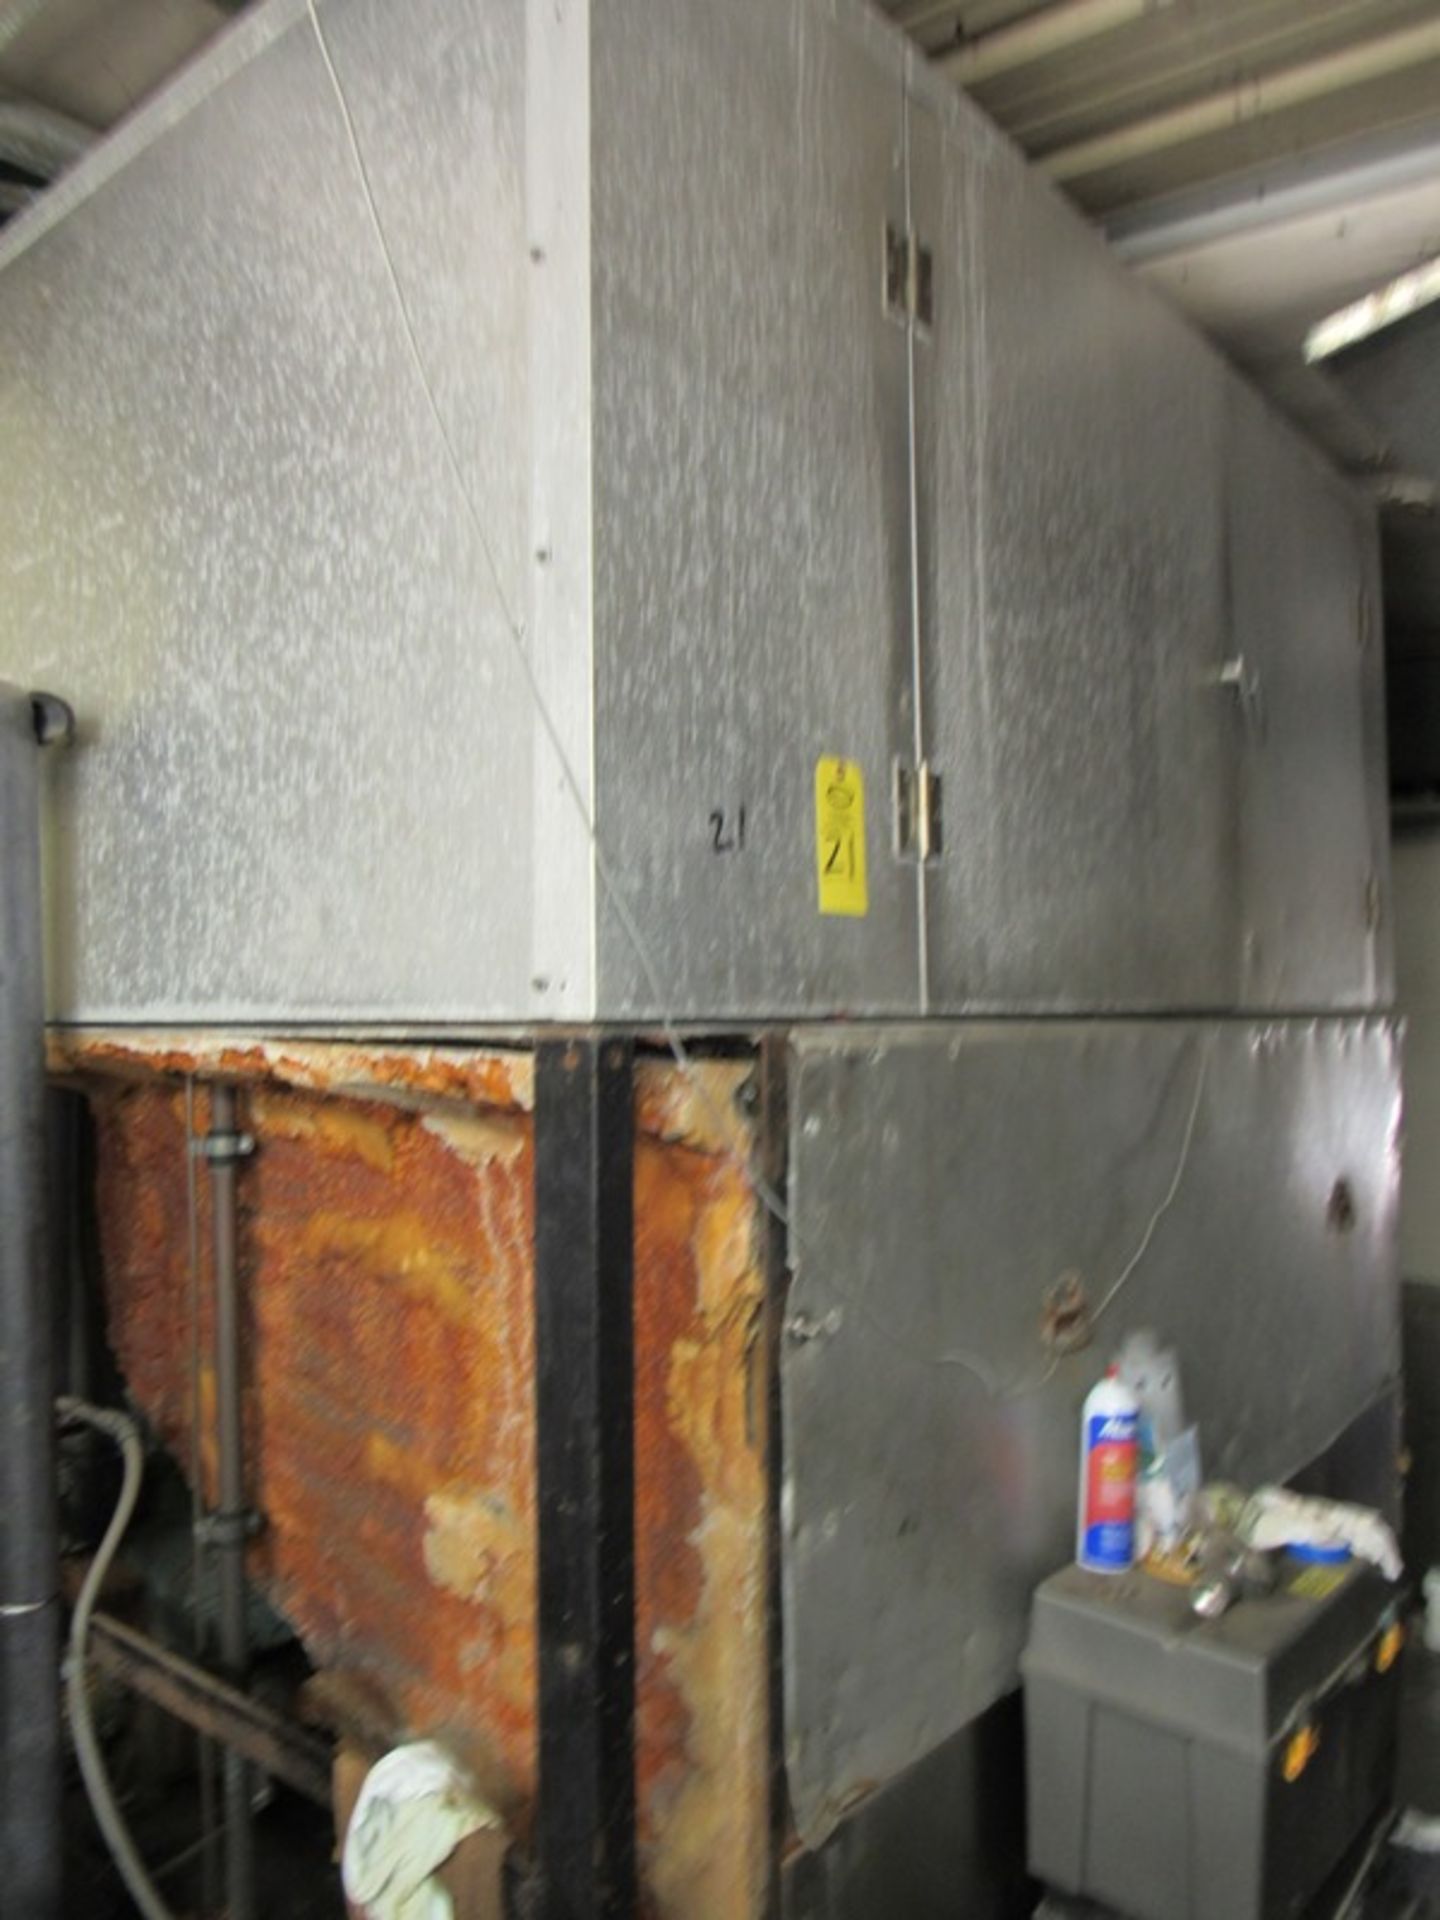 Turbo Mdl. CF23SL Plate Chiller, Ser. #950050, 14 plates (DUE TO COST OF REMOVAL, HAVING TO OPEN